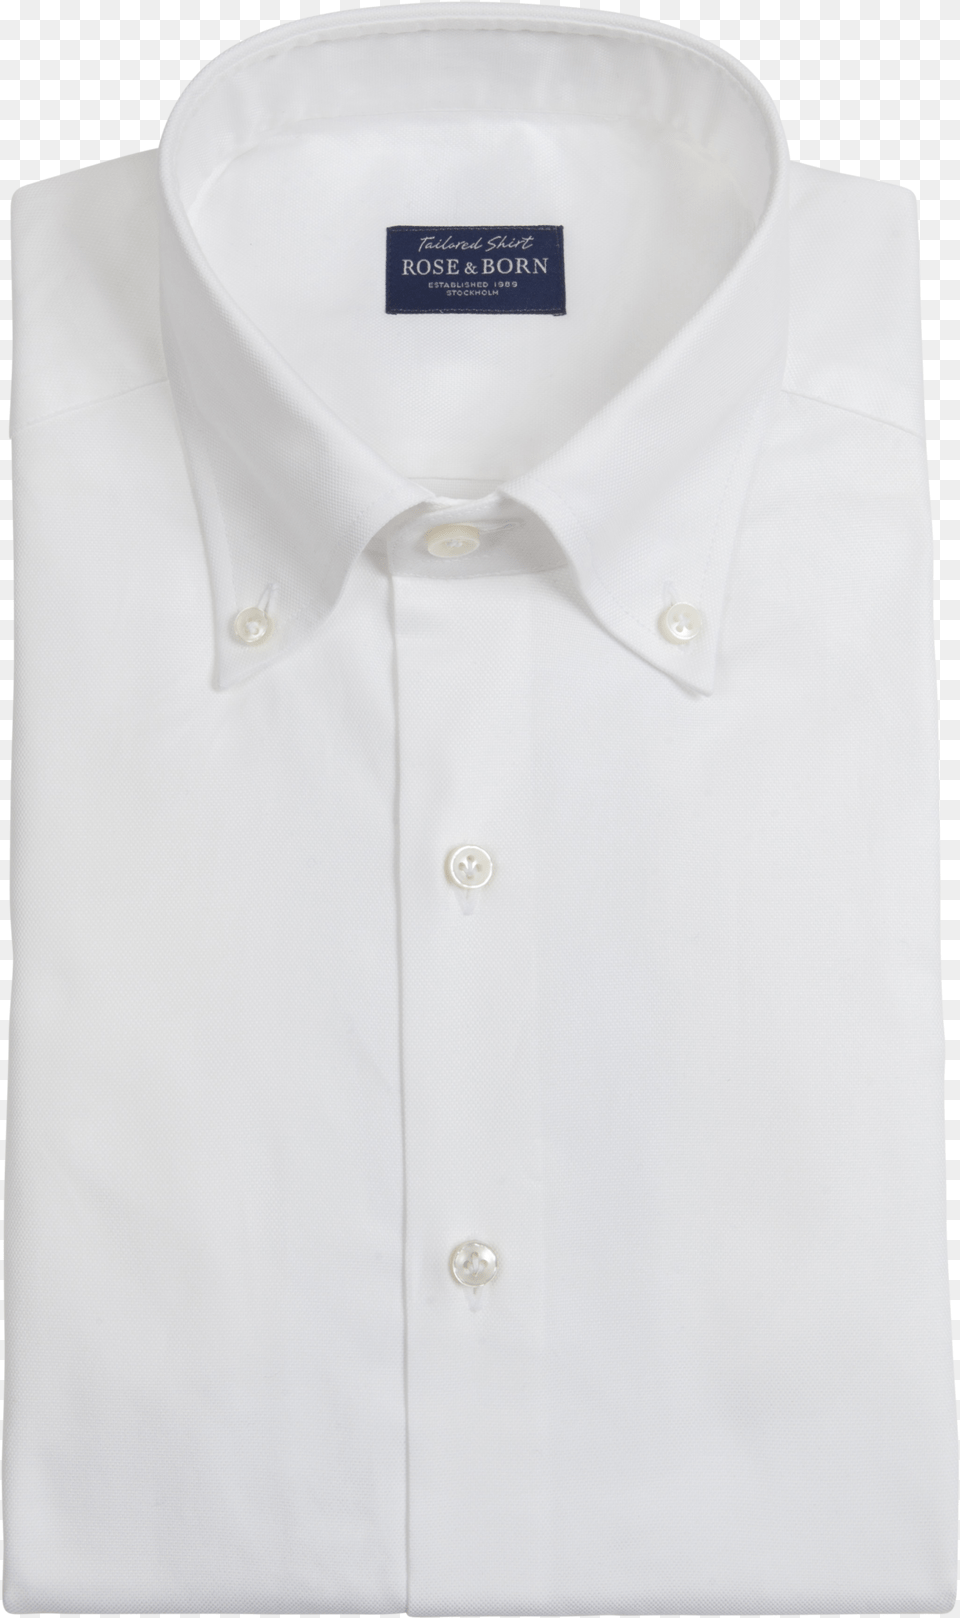 White Button Down Shirt Blue Labeltitle White Button Sleeve, Clothing, Dress Shirt Png Image